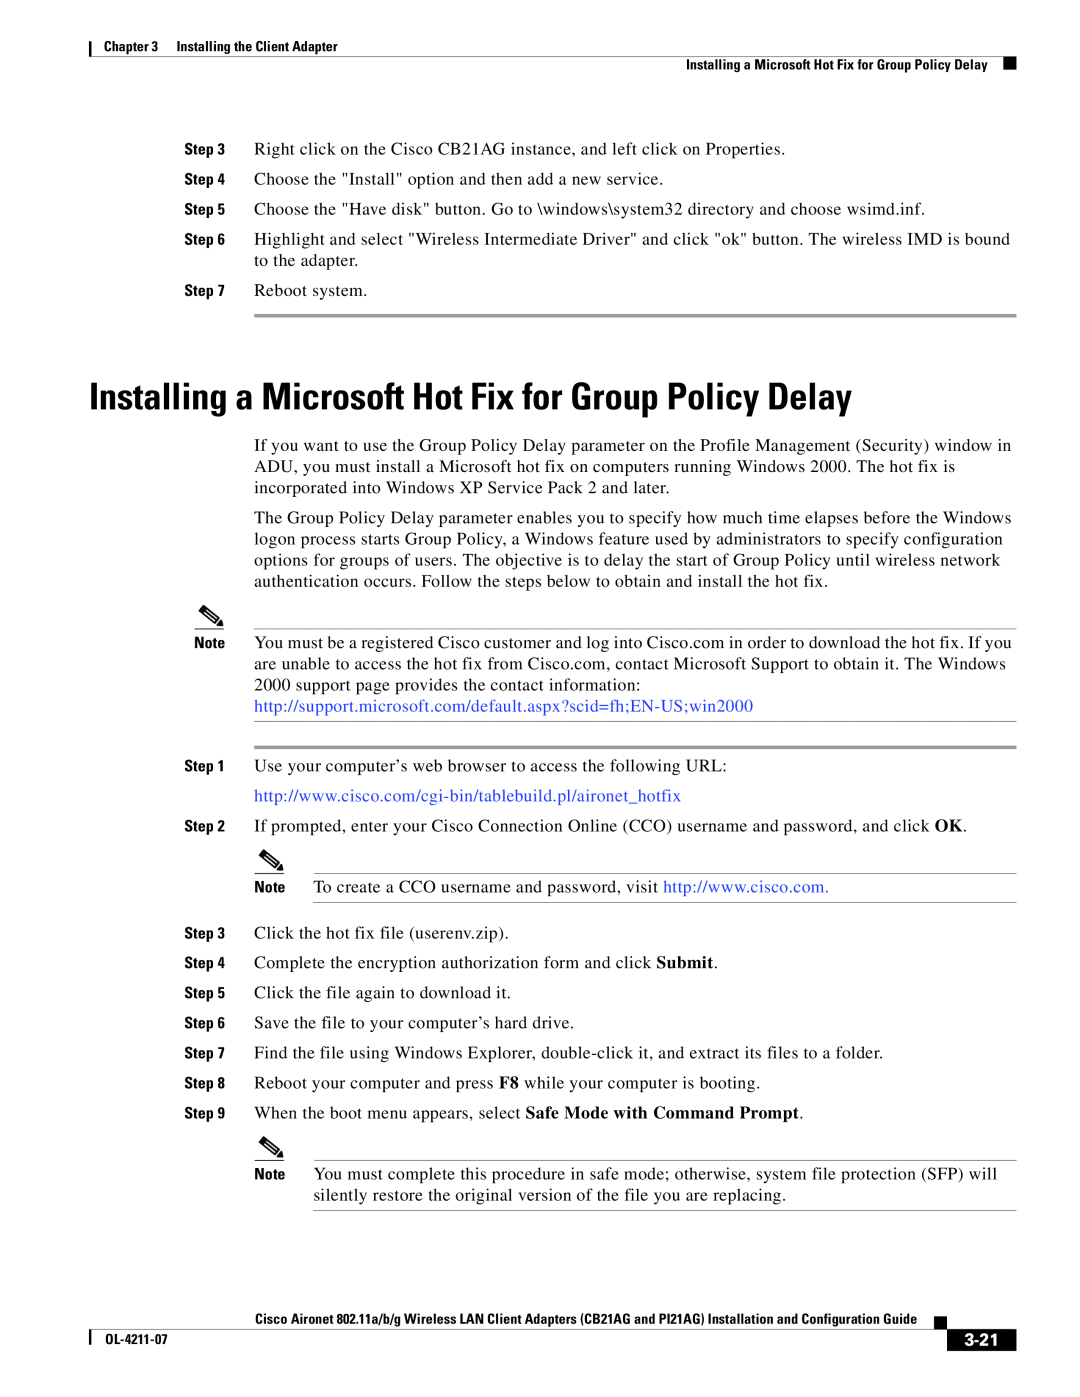 Cisco Systems CB21AG, PI21AG manual Installing a Microsoft Hot Fix for Group Policy Delay, 3-21 